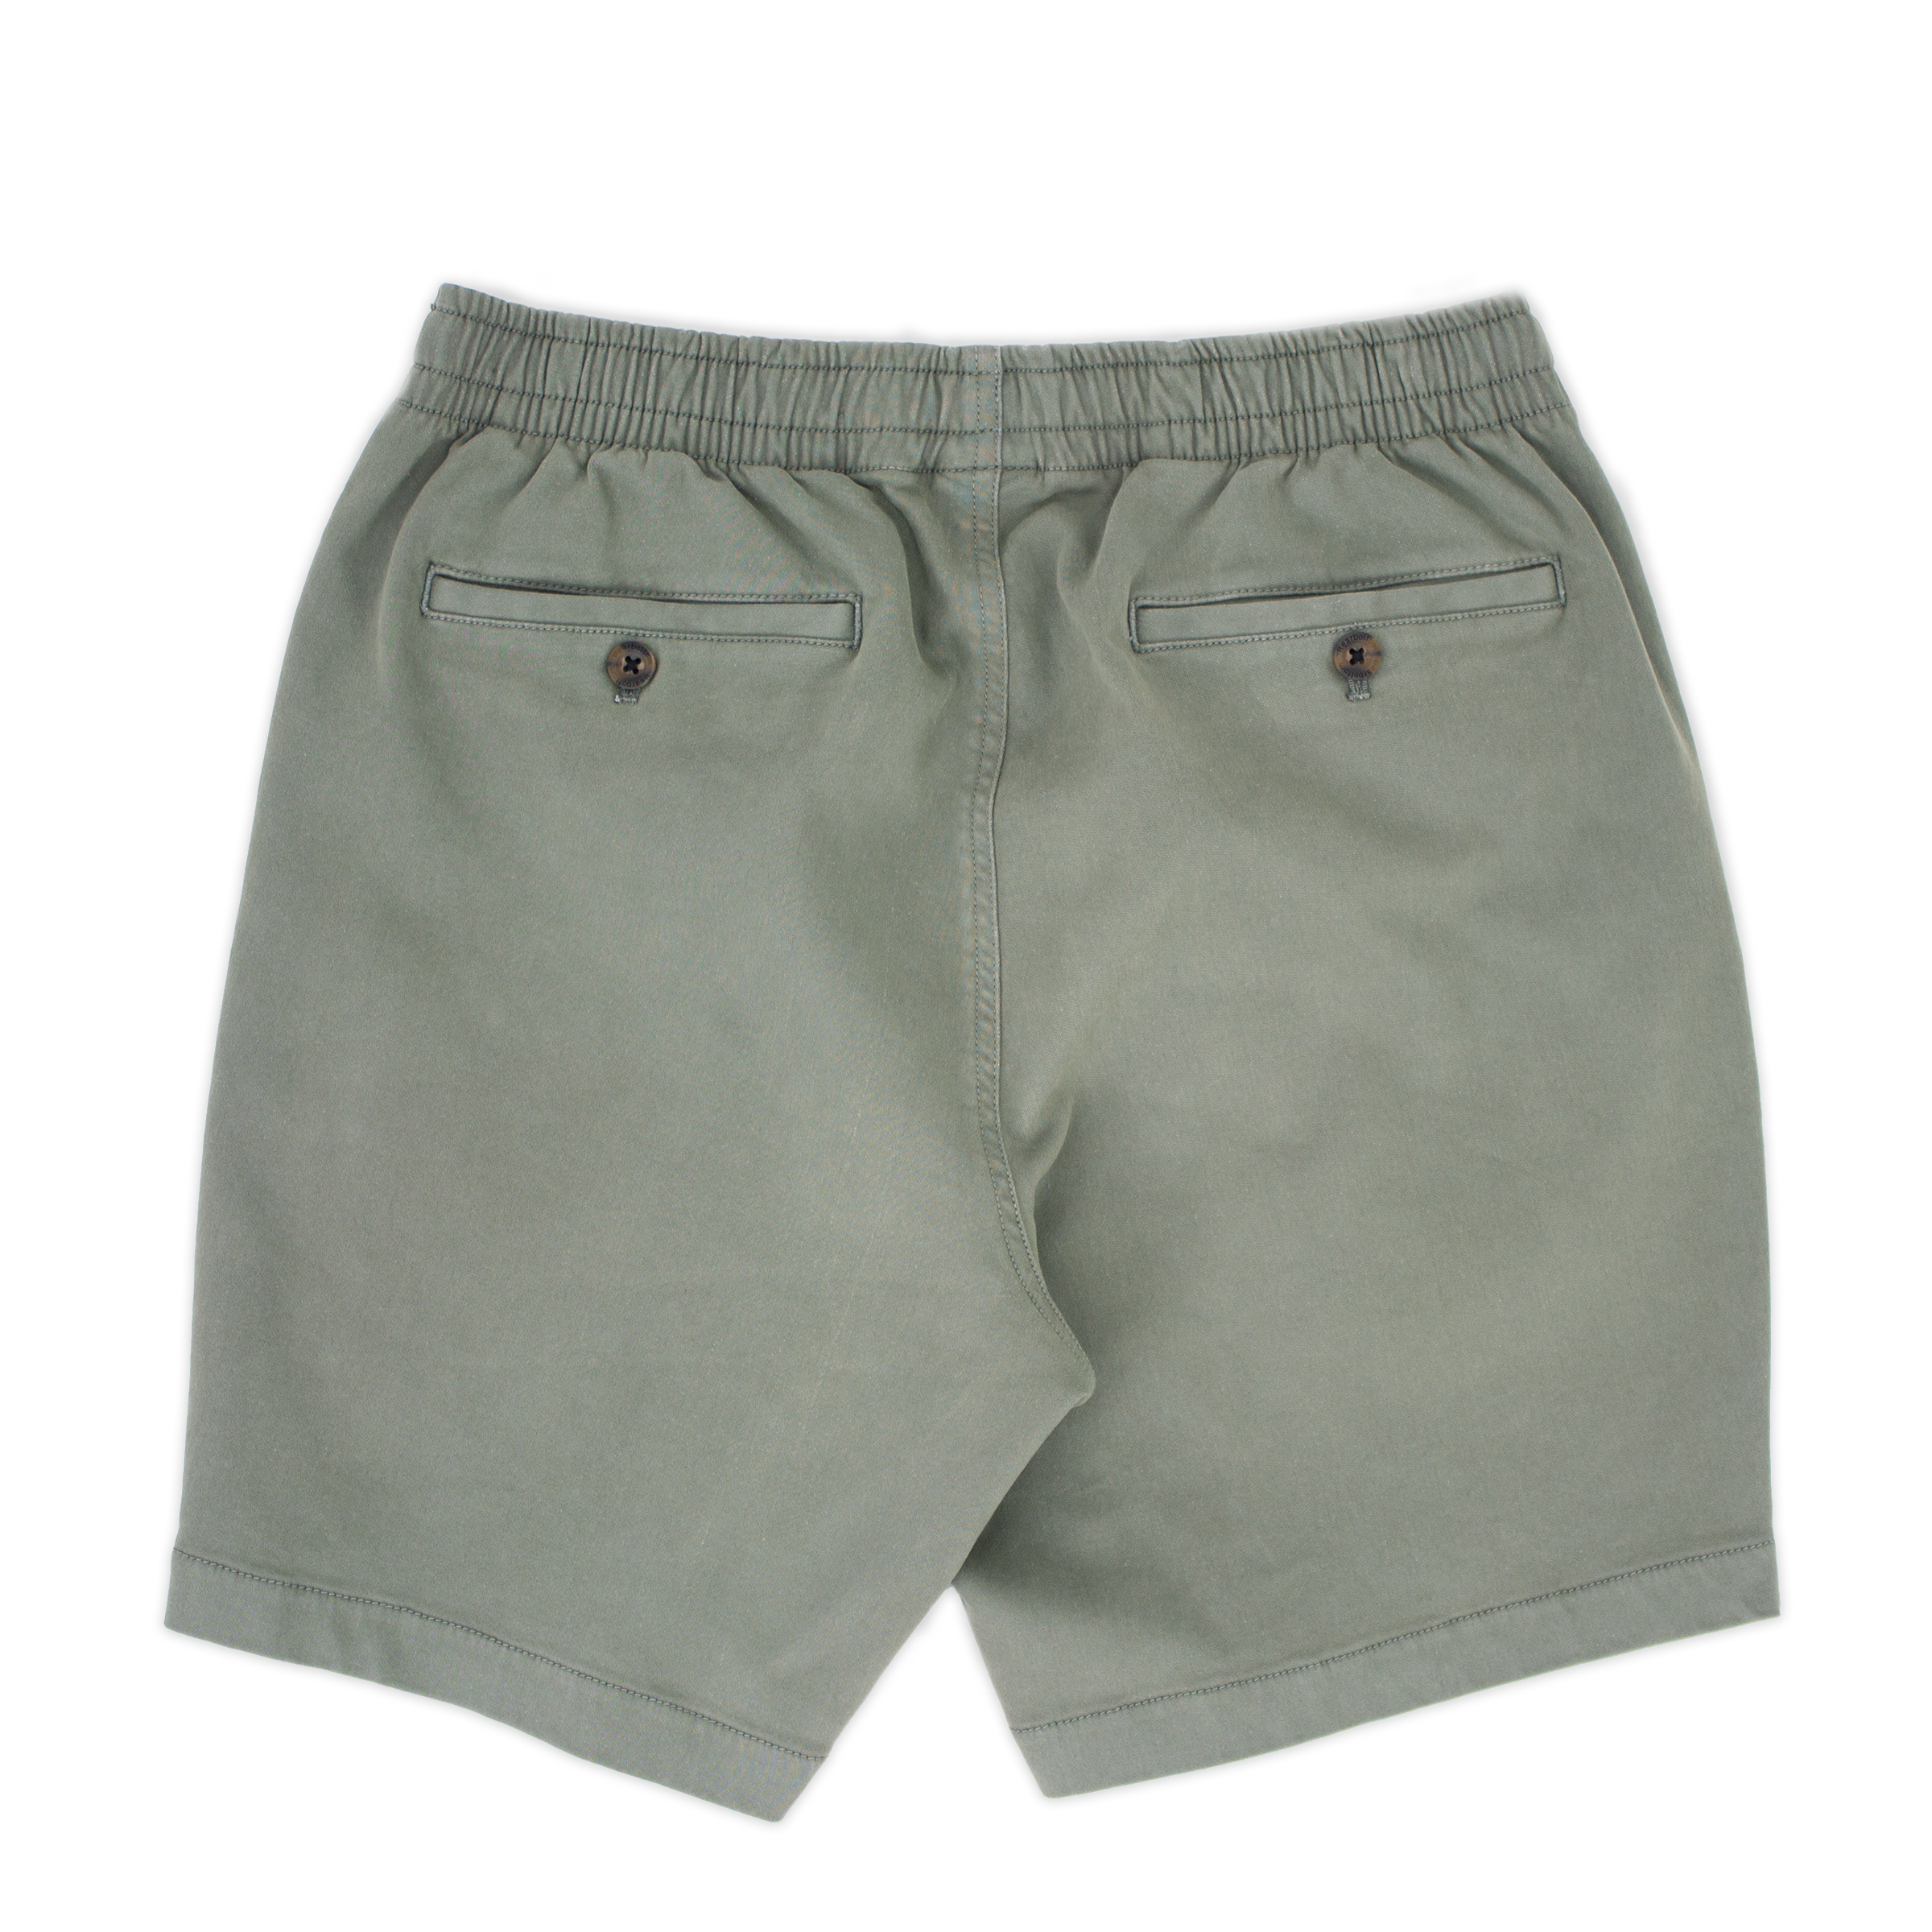 Alto Short 7" inseam in Grey back with elastic waistband and two welt pocket with horn buttons